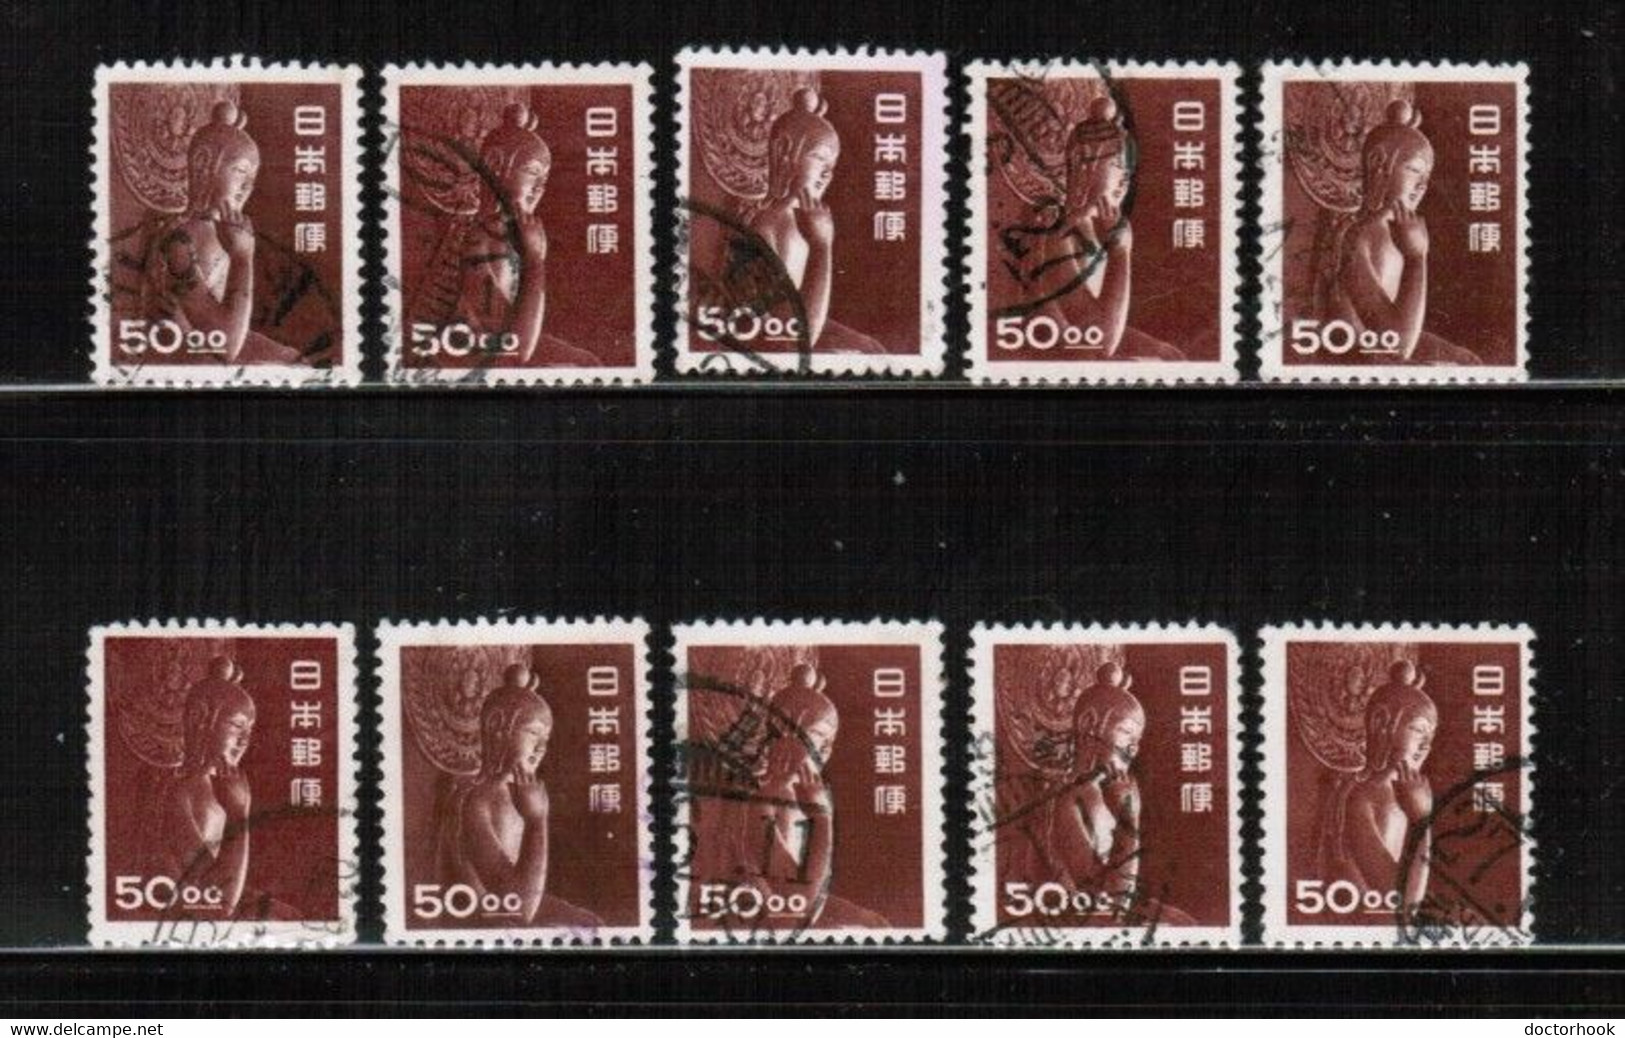 JAPAN   Scott # 521 USED WHOLESALE LOT OF 10 (CONDITION AS PER SCAN) (WH-600) - Collections, Lots & Series